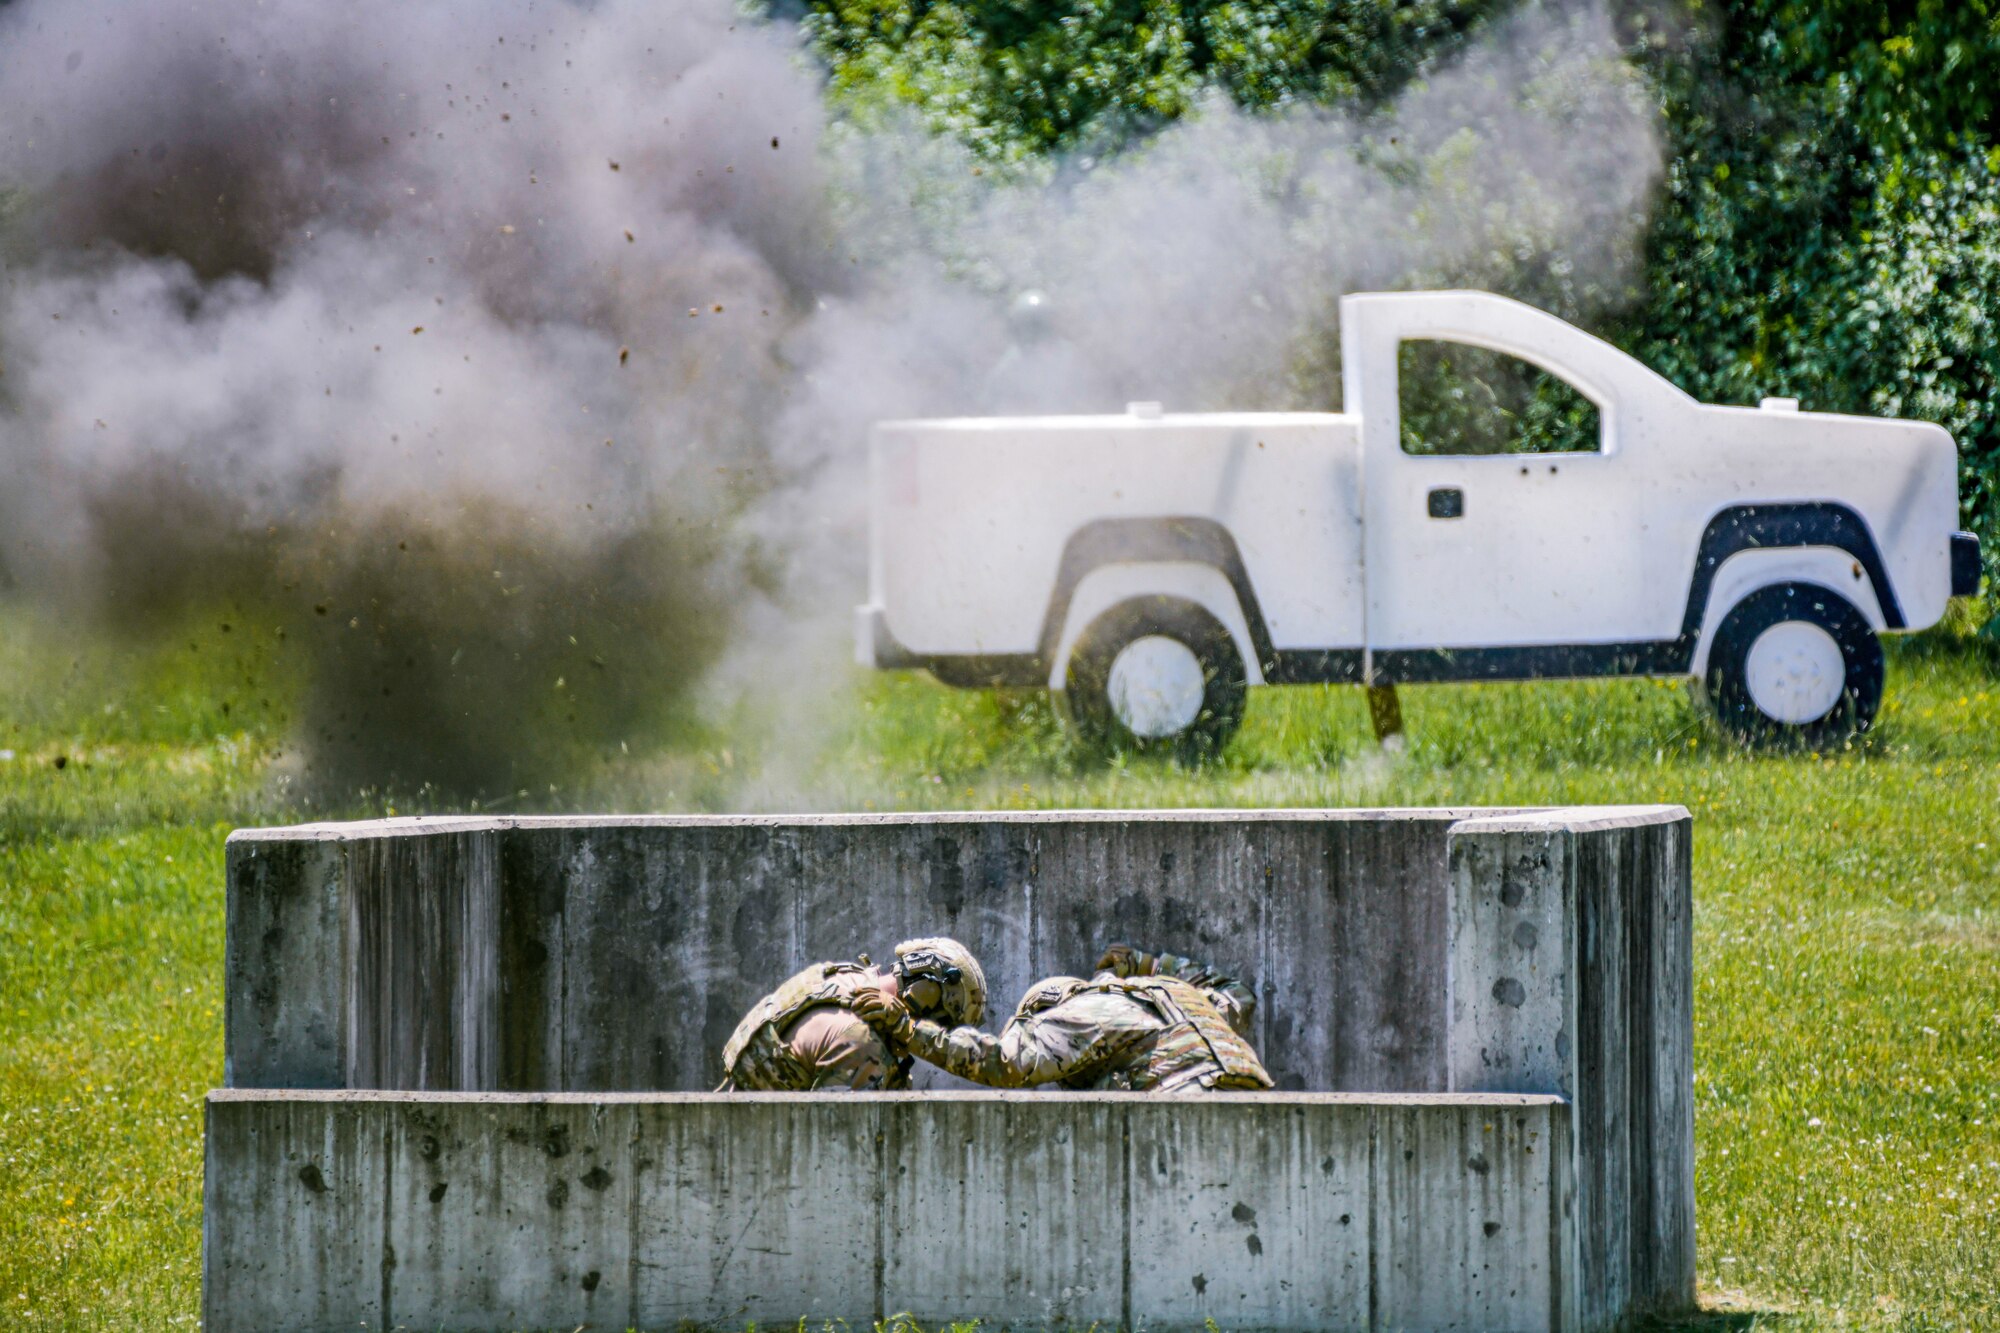 Cadre assigned to the Integrated Defense Leadership Course qualify on live grenades at Camp James A. Garfield Joint Military Training Center, Ohio, May 31, 2023.